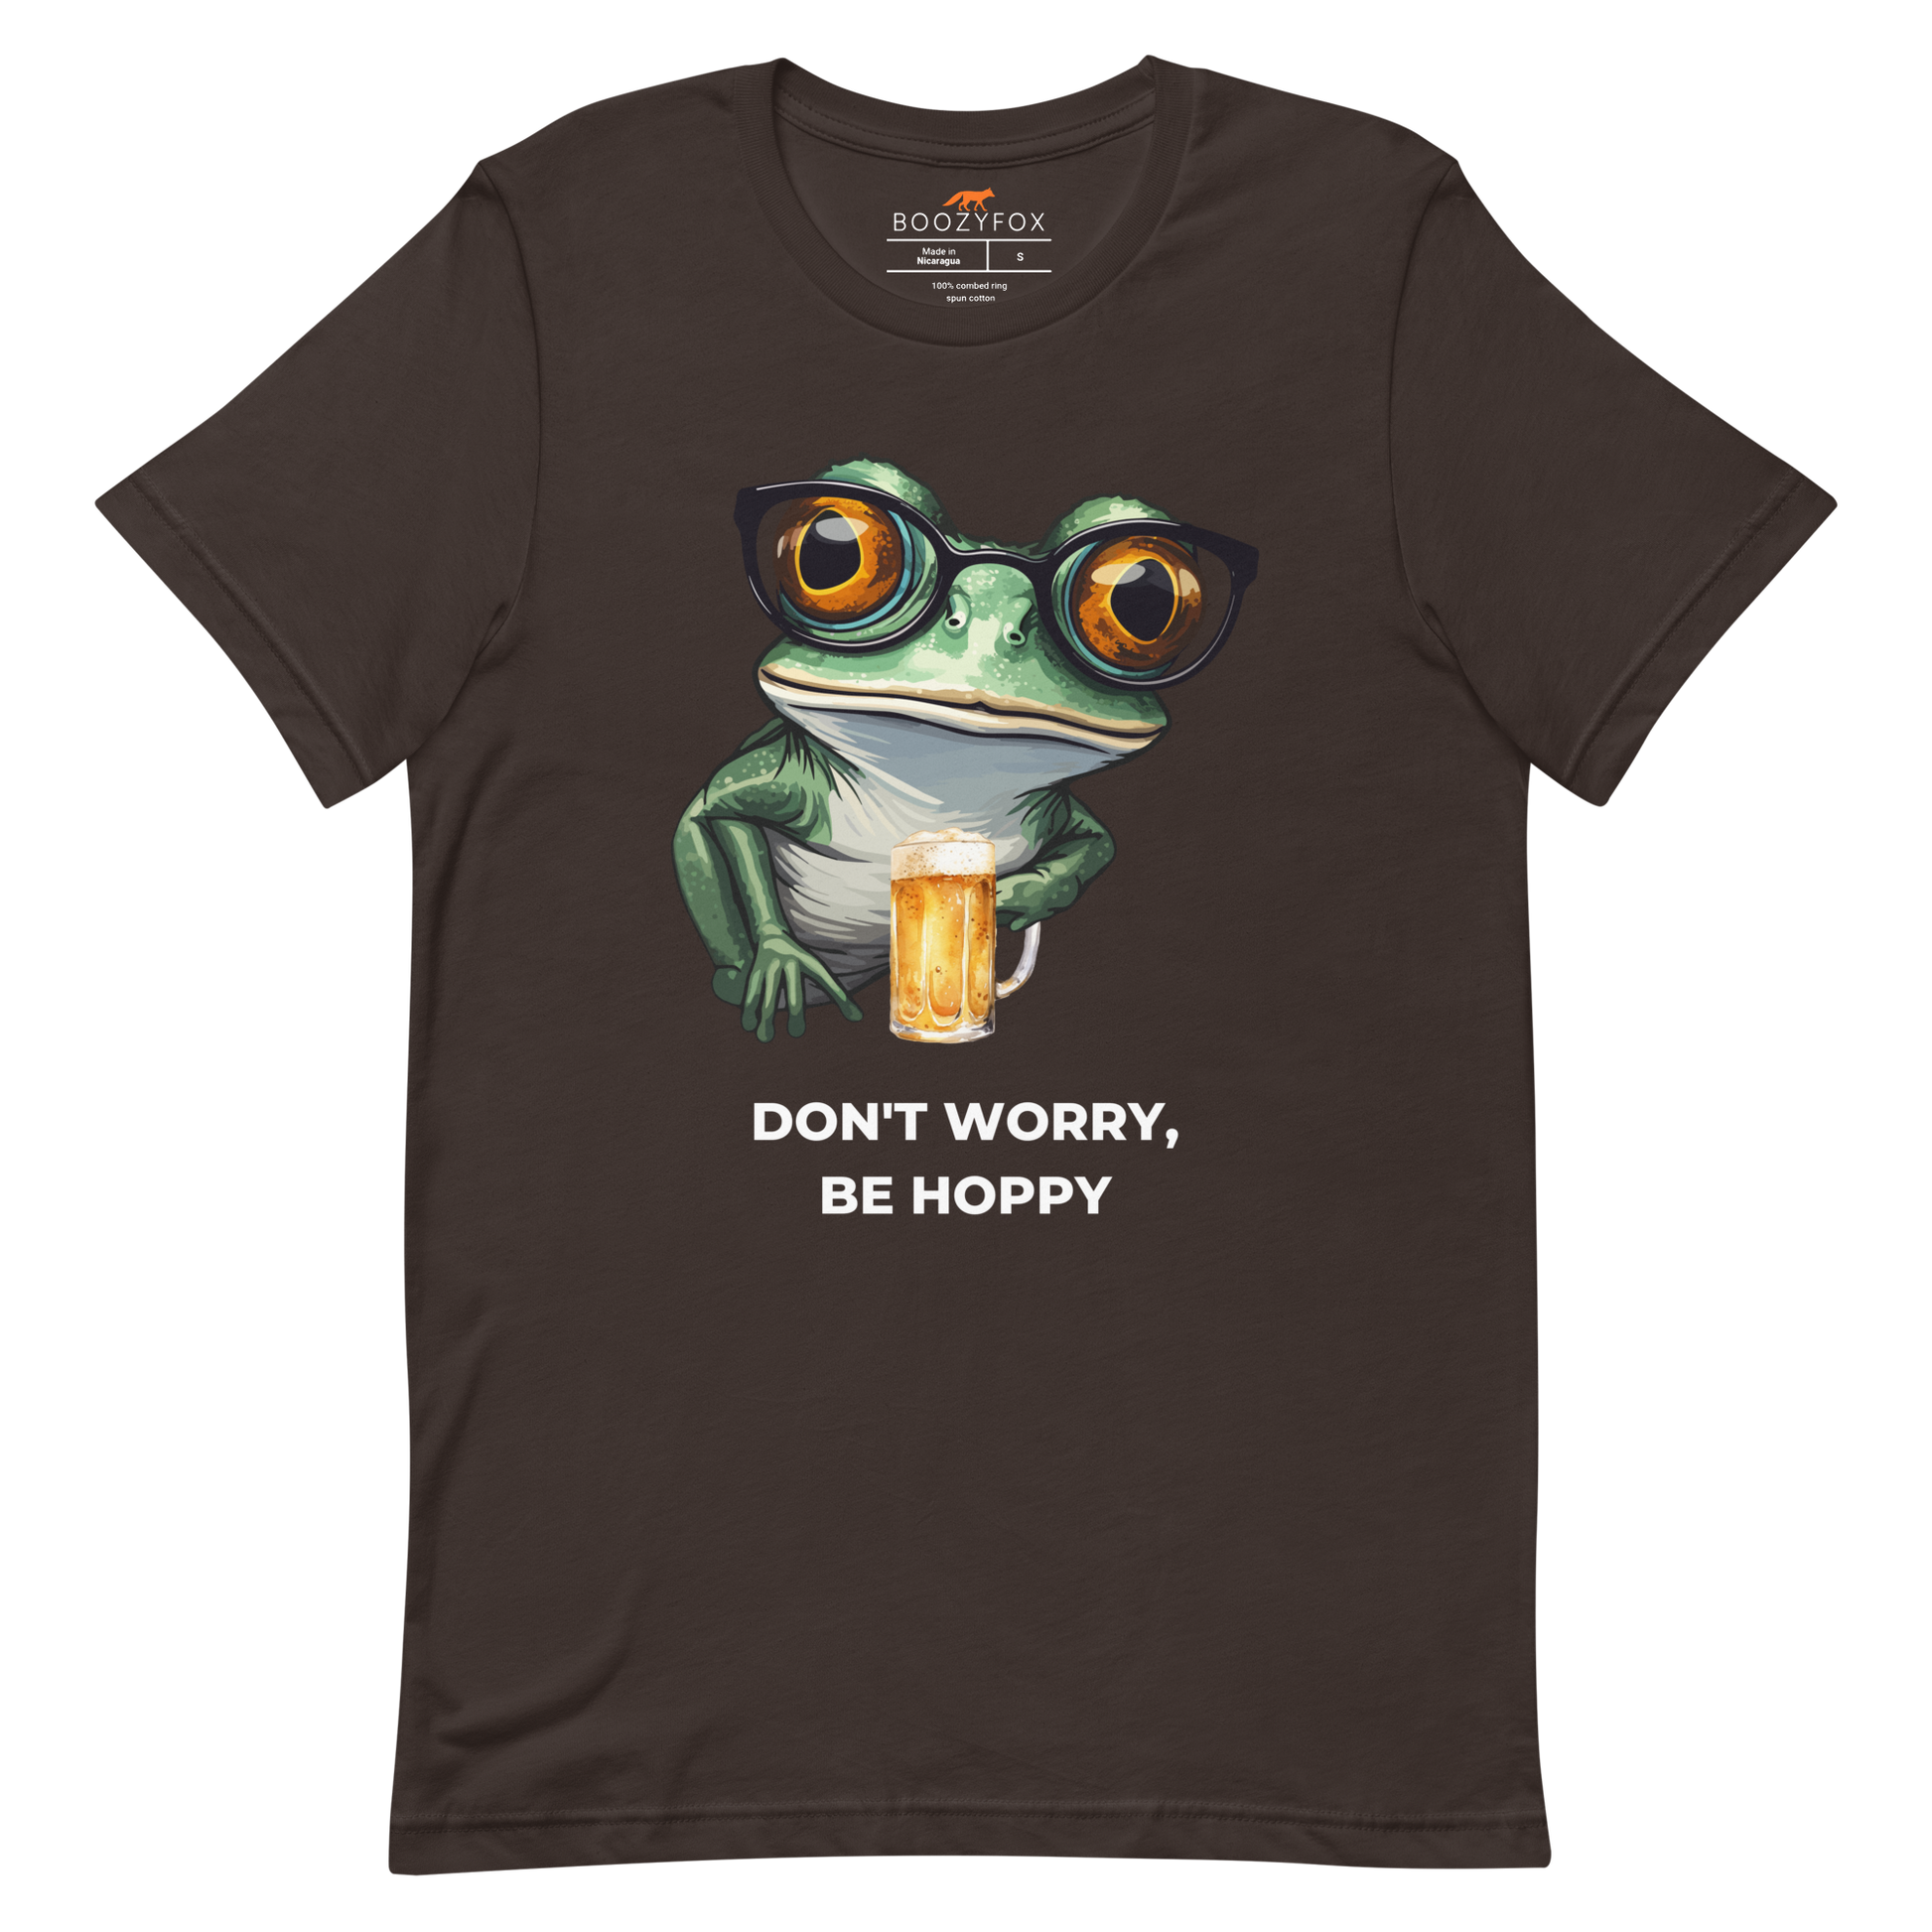 Brown Premium Frog Tee featuring a funny Don't Worry, Be Hoppy graphic on the chest - Funny Graphic Frog Tees - Boozy Fox